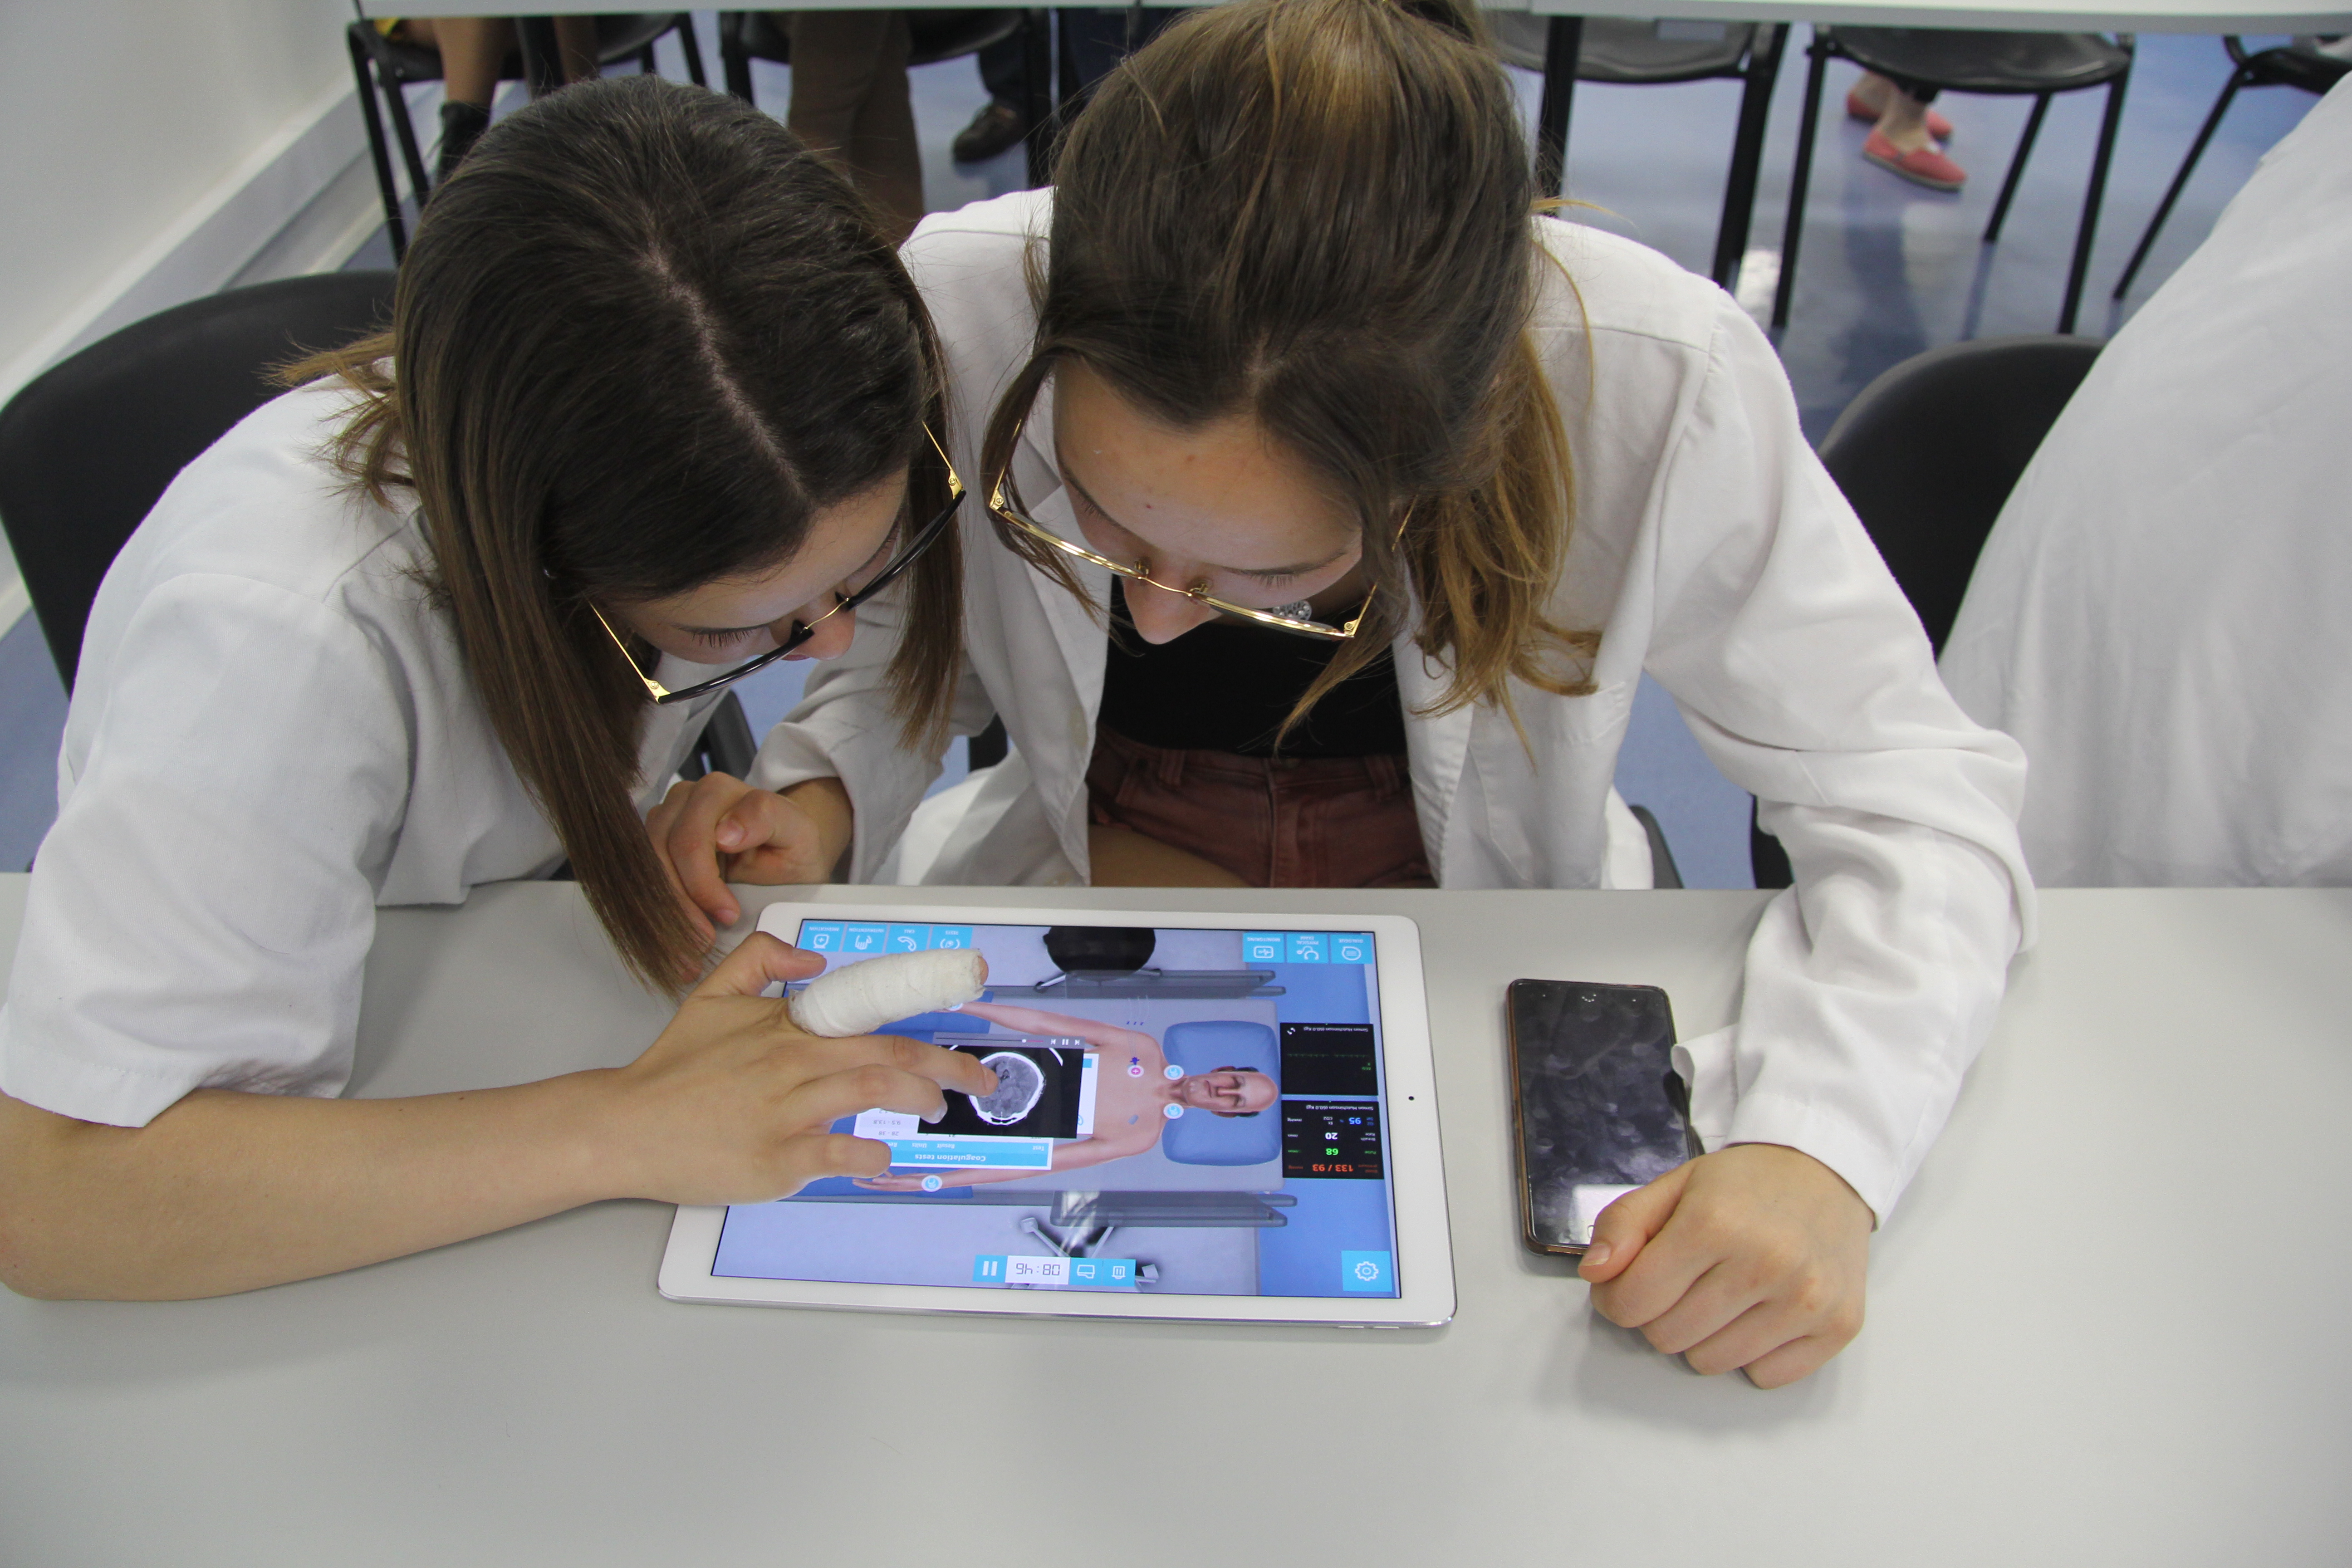 Two students using Body Interact on a tablet in a classroom setting